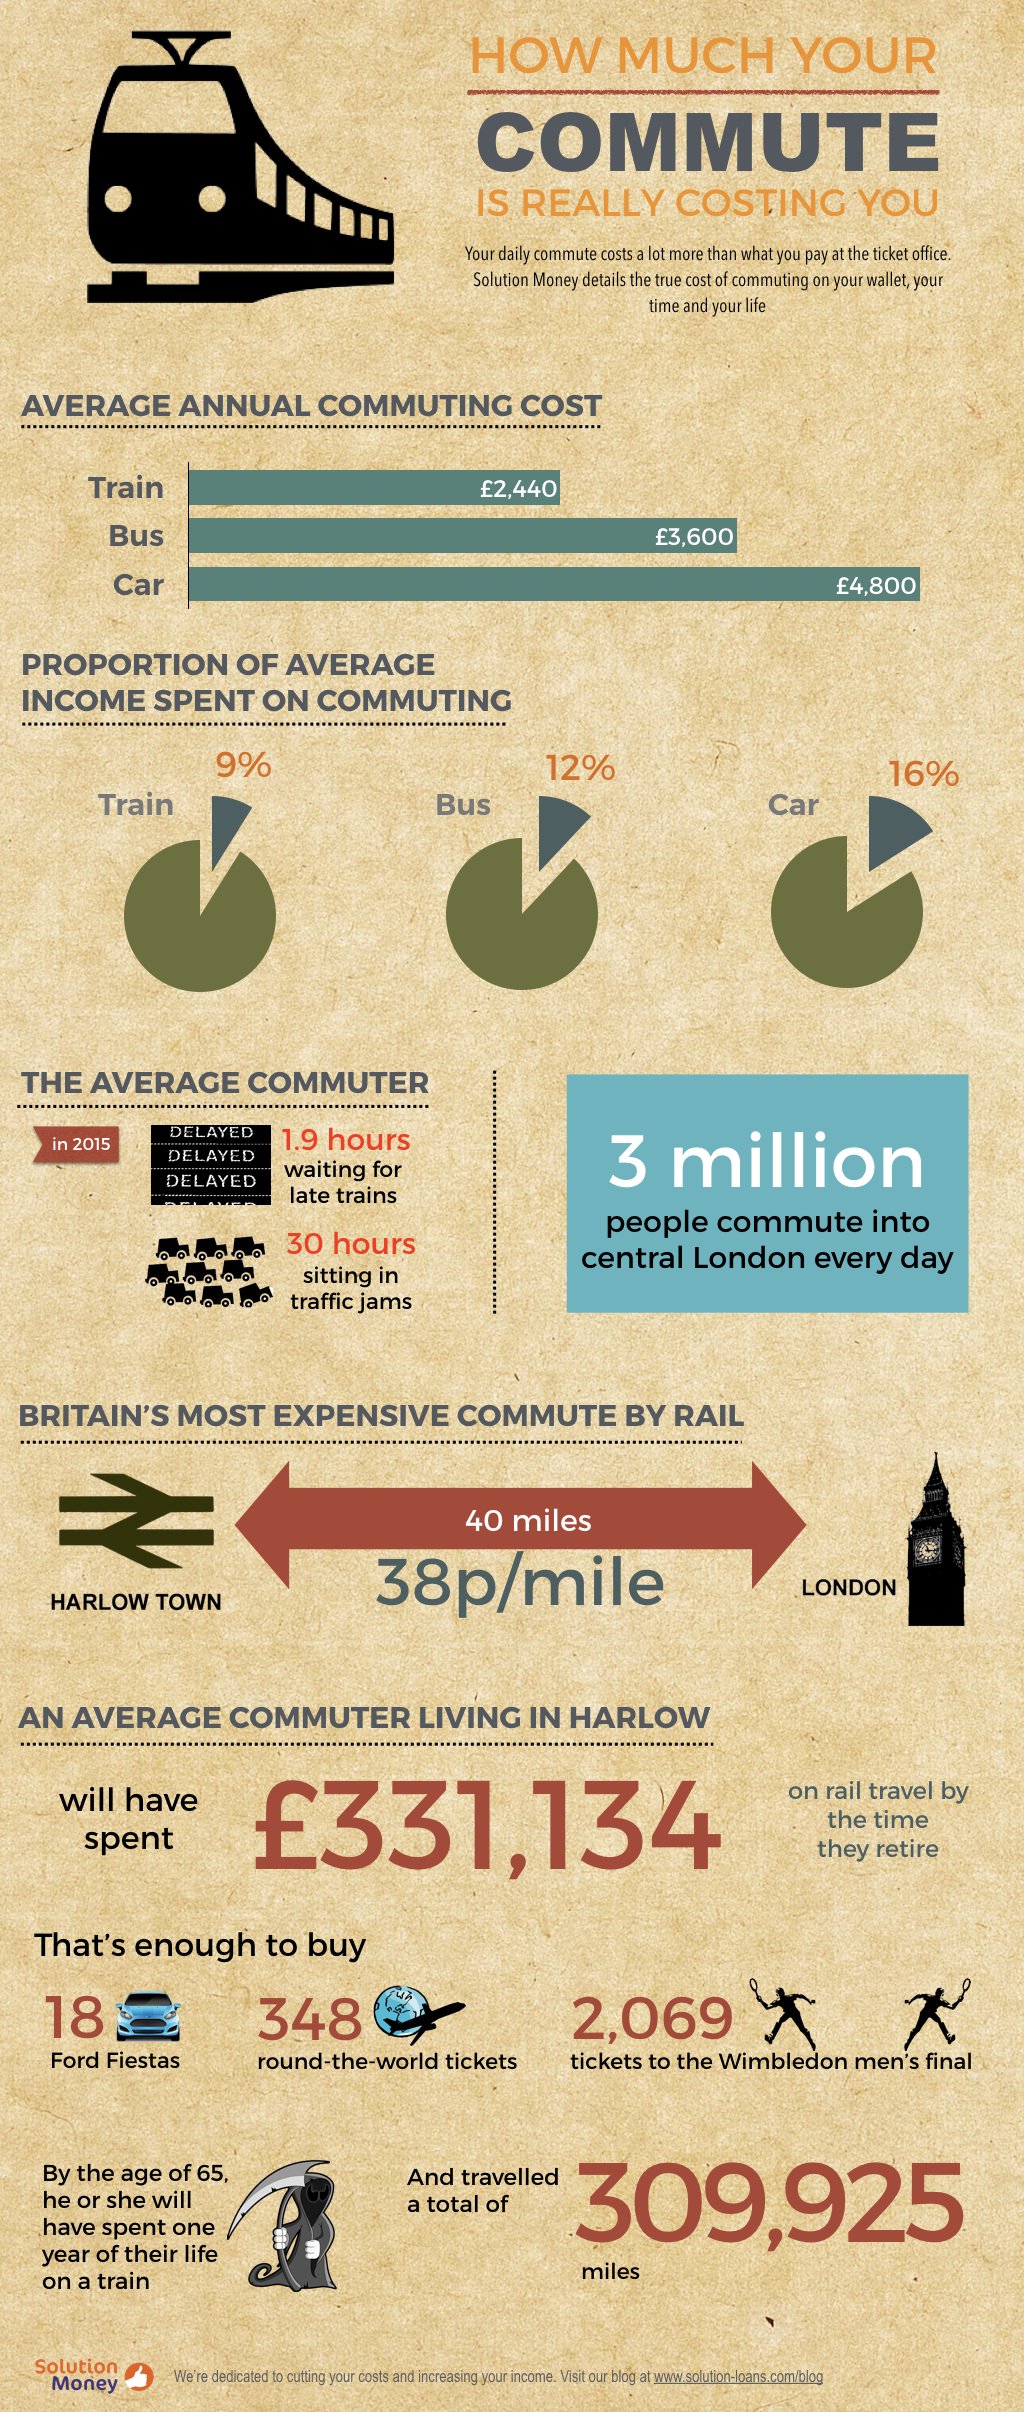 How much your commute is really costing you